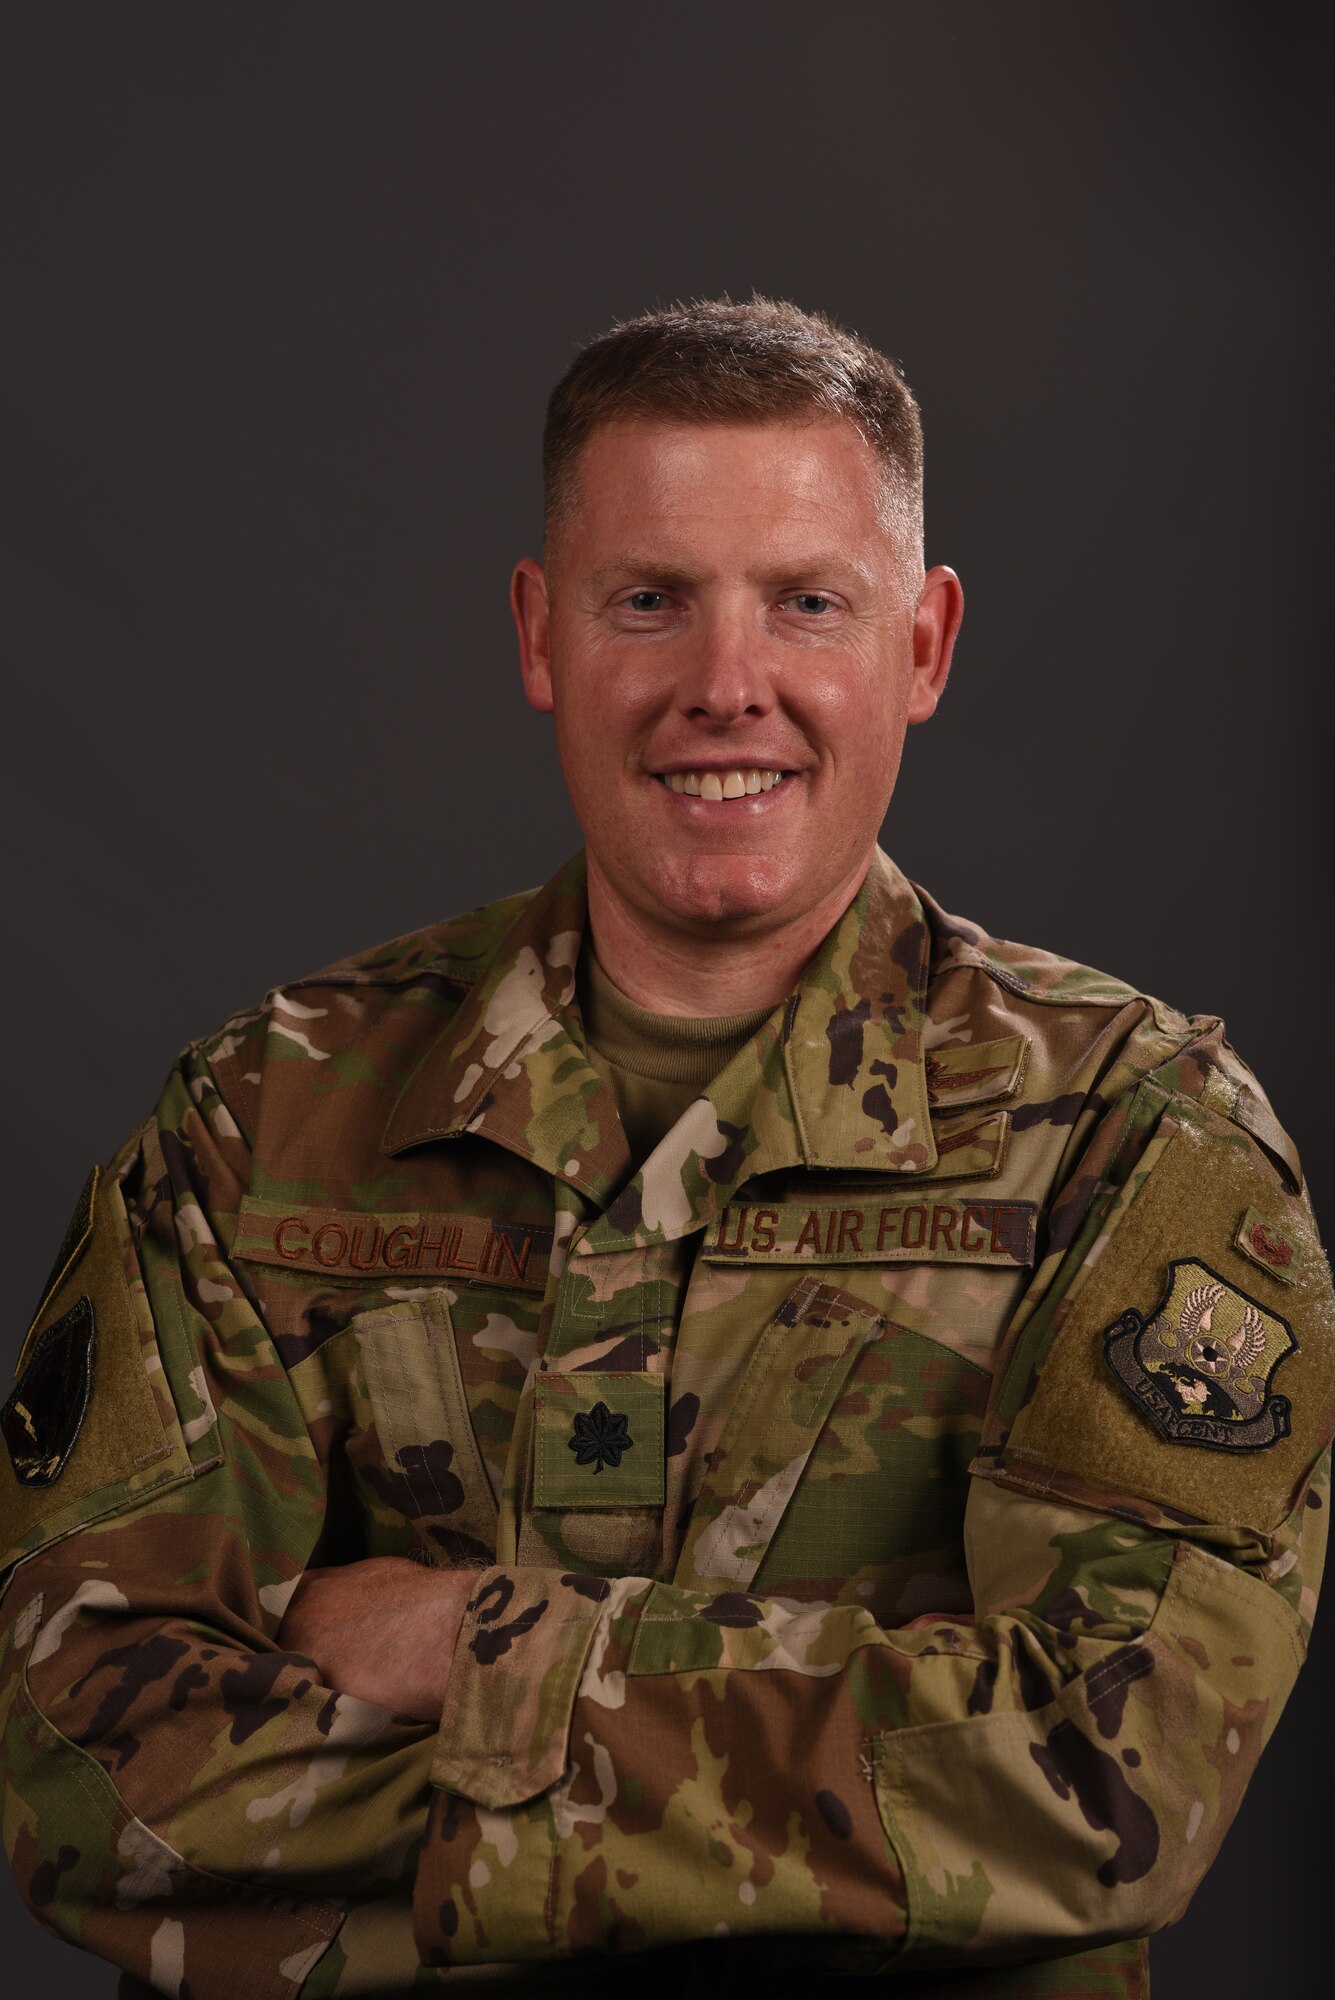 Lt. Col. Coughlin, United Sates Air Forces Central Command director of communications, smiles while in uniform, at Shaw Air Force Base, South Carolina, Aug. 20, 2019.